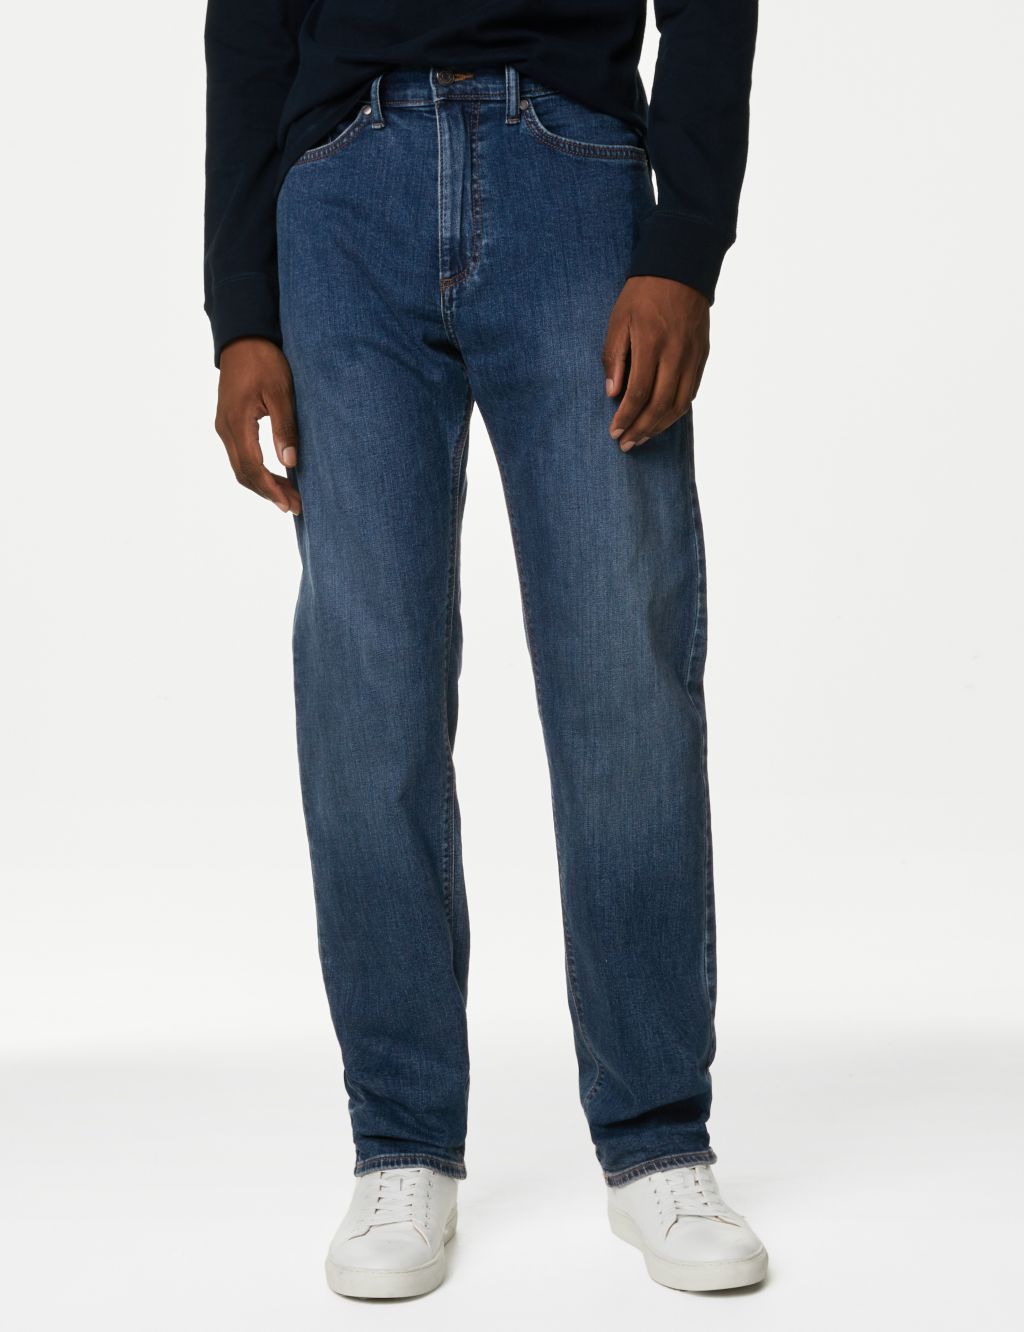 Straight Fit Stretch Jeans image 1